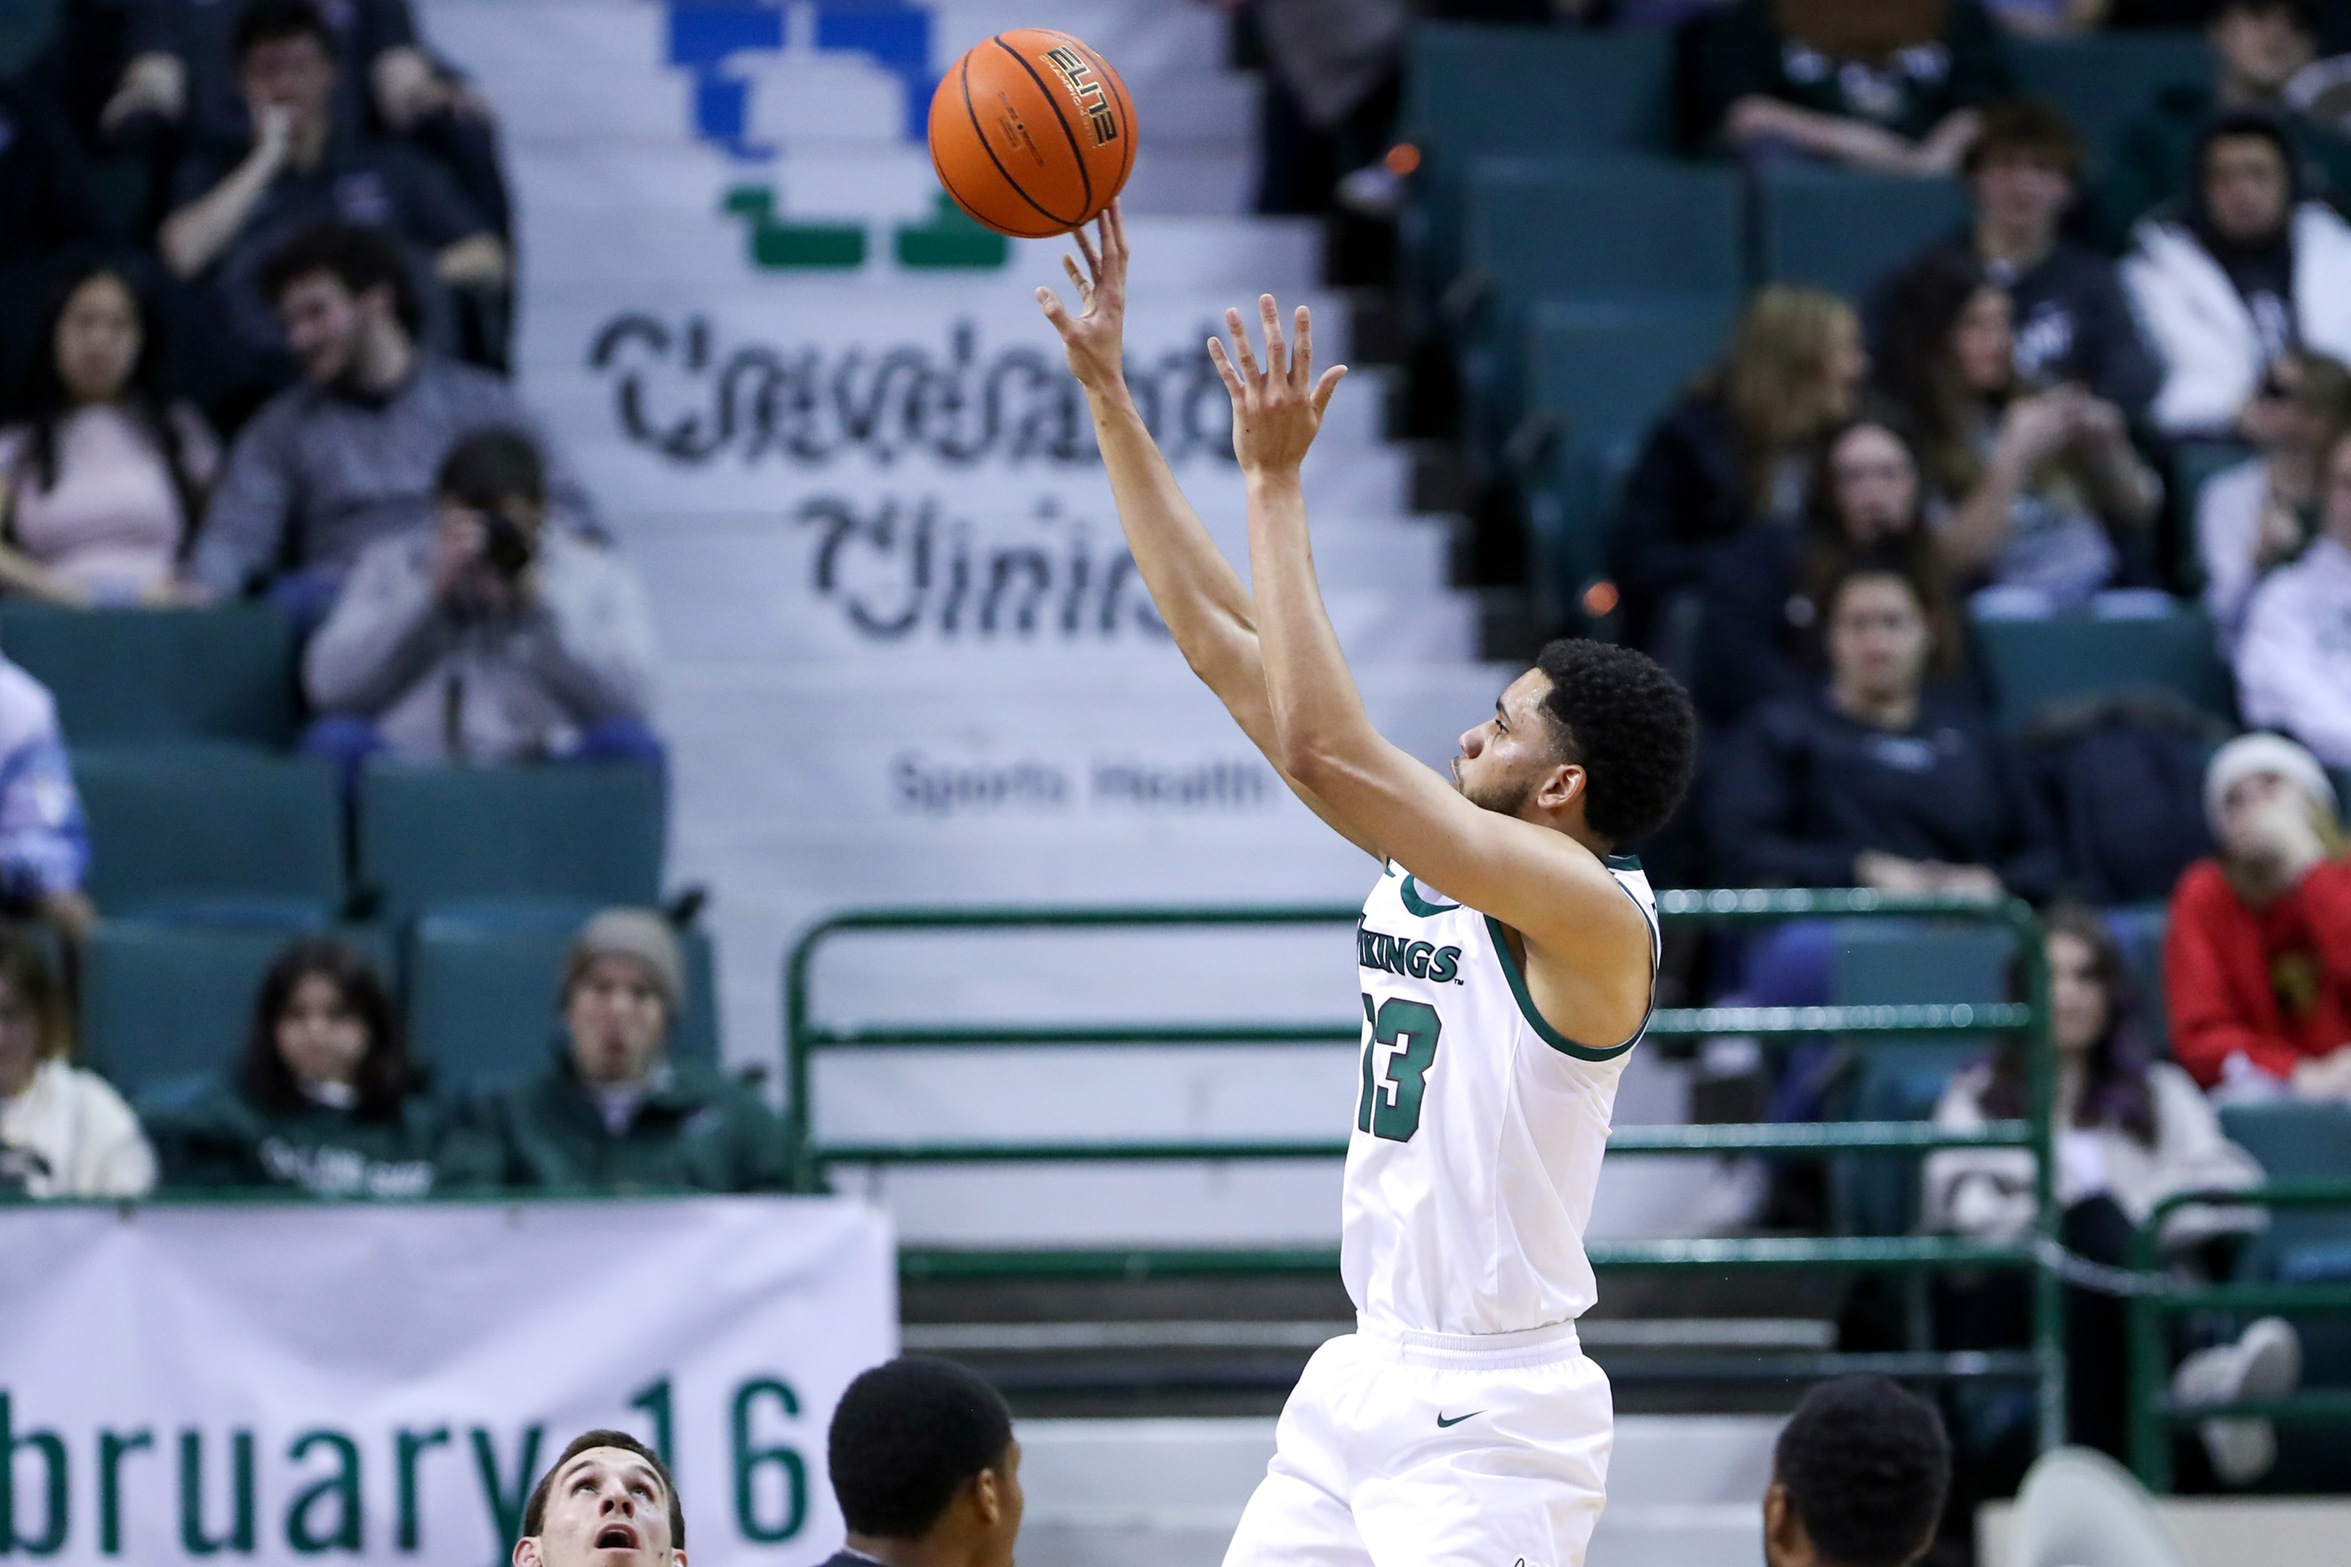 Cleveland State Men’s Basketball Earns Victory over Purdue Fort Wayne